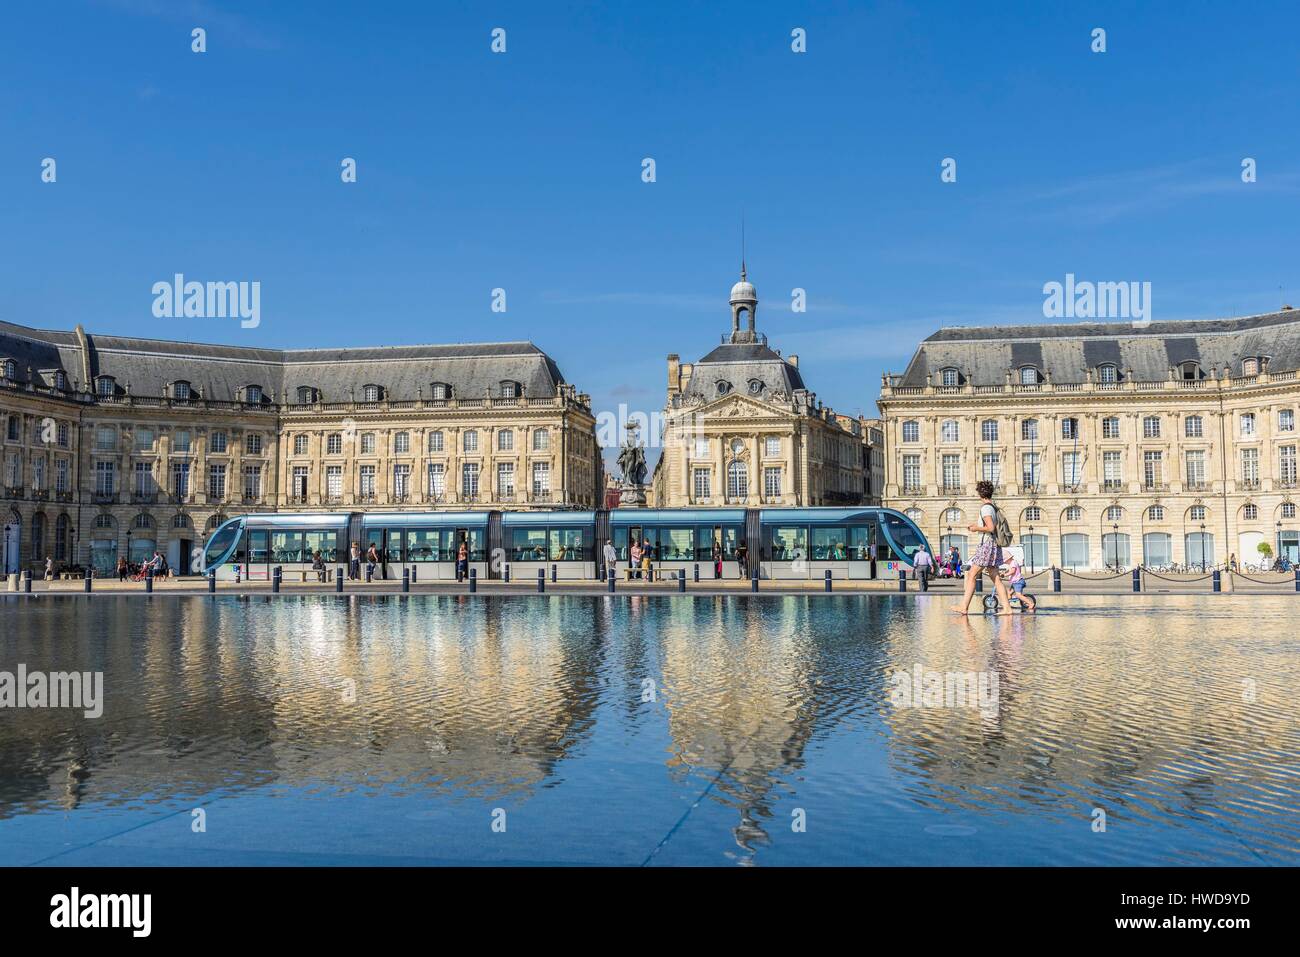 France, Gironde, Bordeaux, area listed as World Heritage by UNESCO, 18th century Bourse square, The Miroir d'eau (Water Mirror), 2006 work by the fountain maker Jean-Max Llorca, architect Pierre Gangnet and urbanist Michel Corajoud, C line tramway Stock Photo